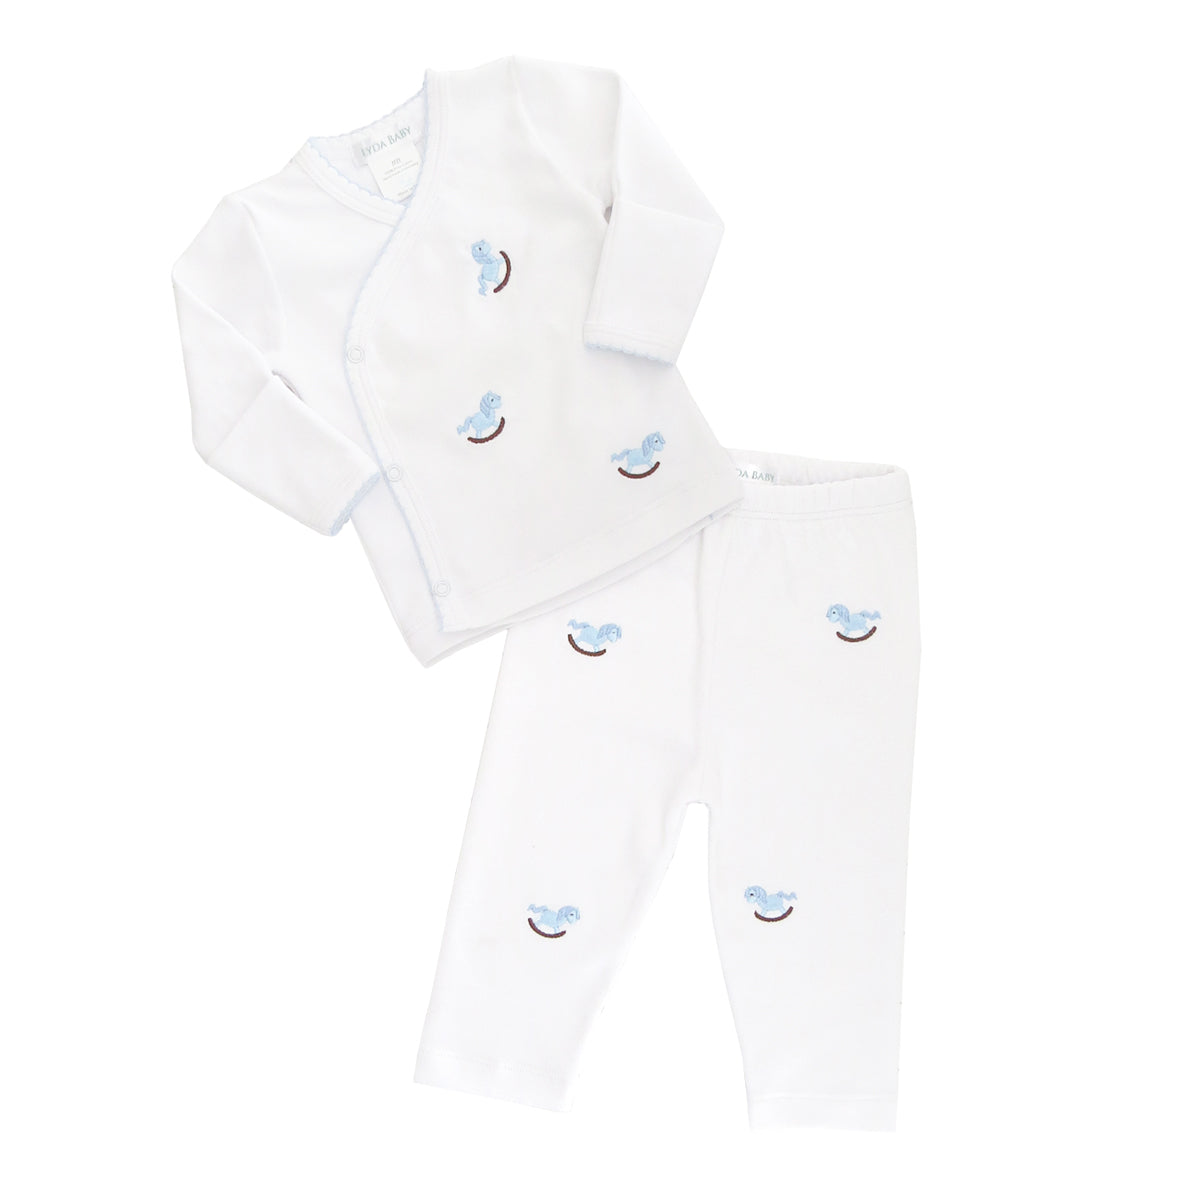 Woodhorse Embroidery Set 4 Pieces | Baby Boy